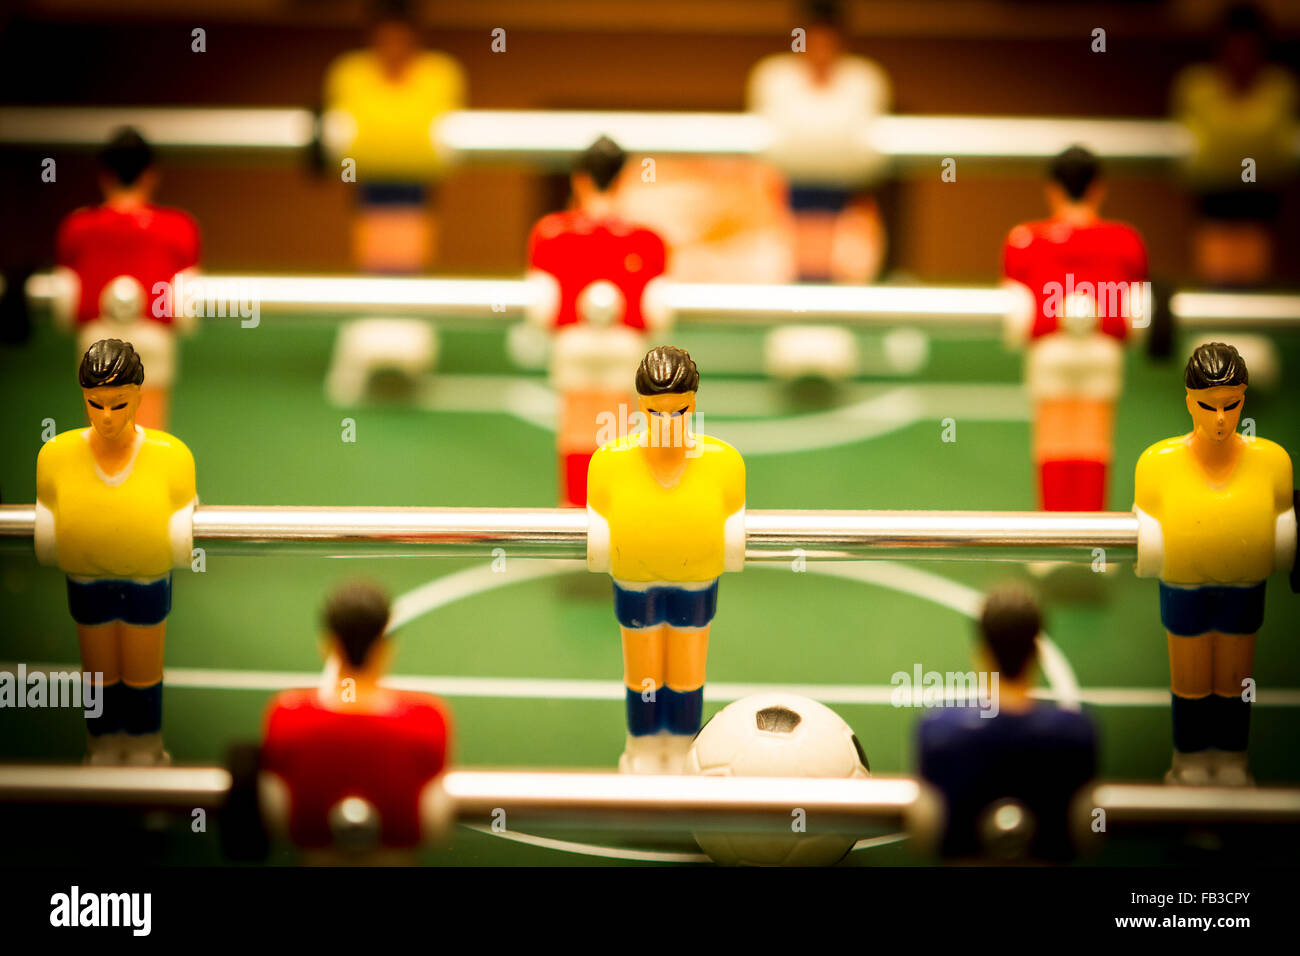 Close up of footballers on a table football game Stock Photo